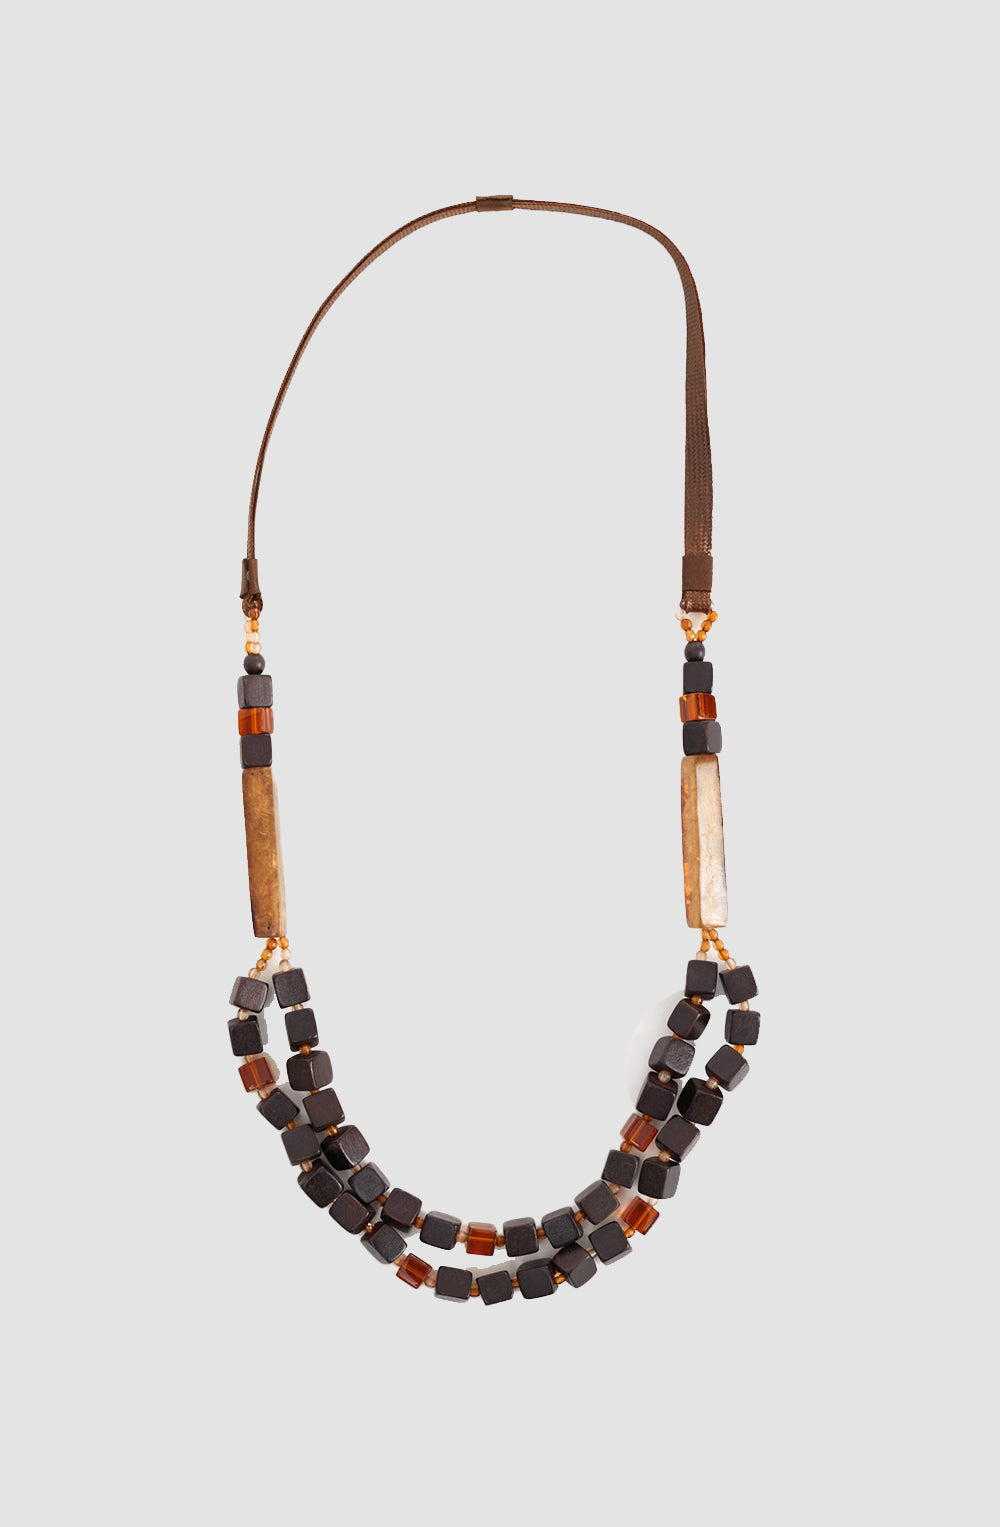 Cube Bead Necklace in Brown Tones